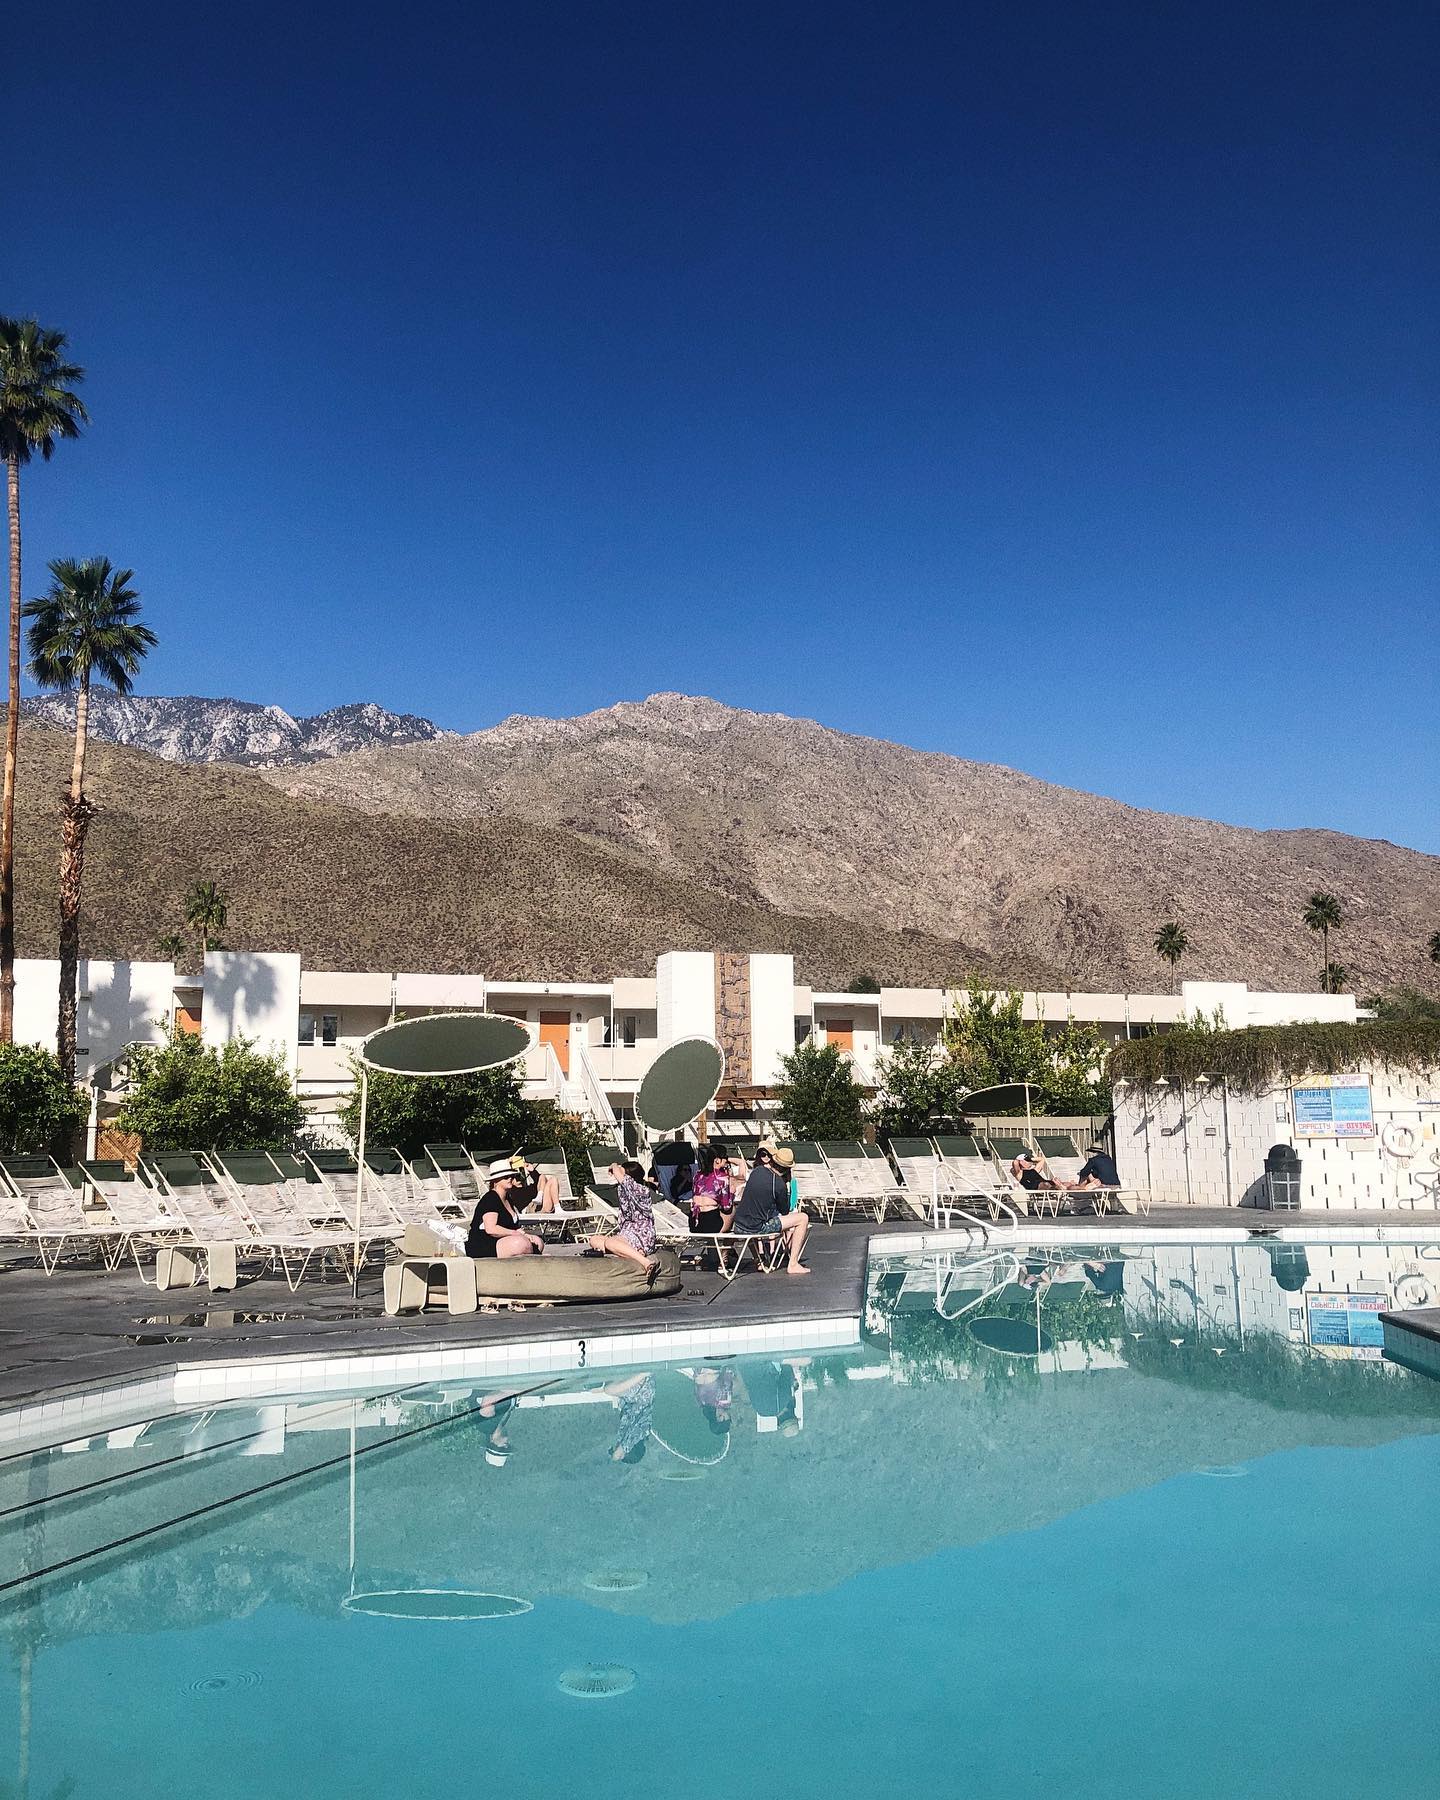 The @acehotelpalmsprings is still a desert💎 and one of the few more boutique-style stays in Palm Springs that allow kids. •
•
•
•
•
#familytravel #travelwithkids #thingsiwanttoremember #kidstravel #travelkids #familytrip #palmsprings